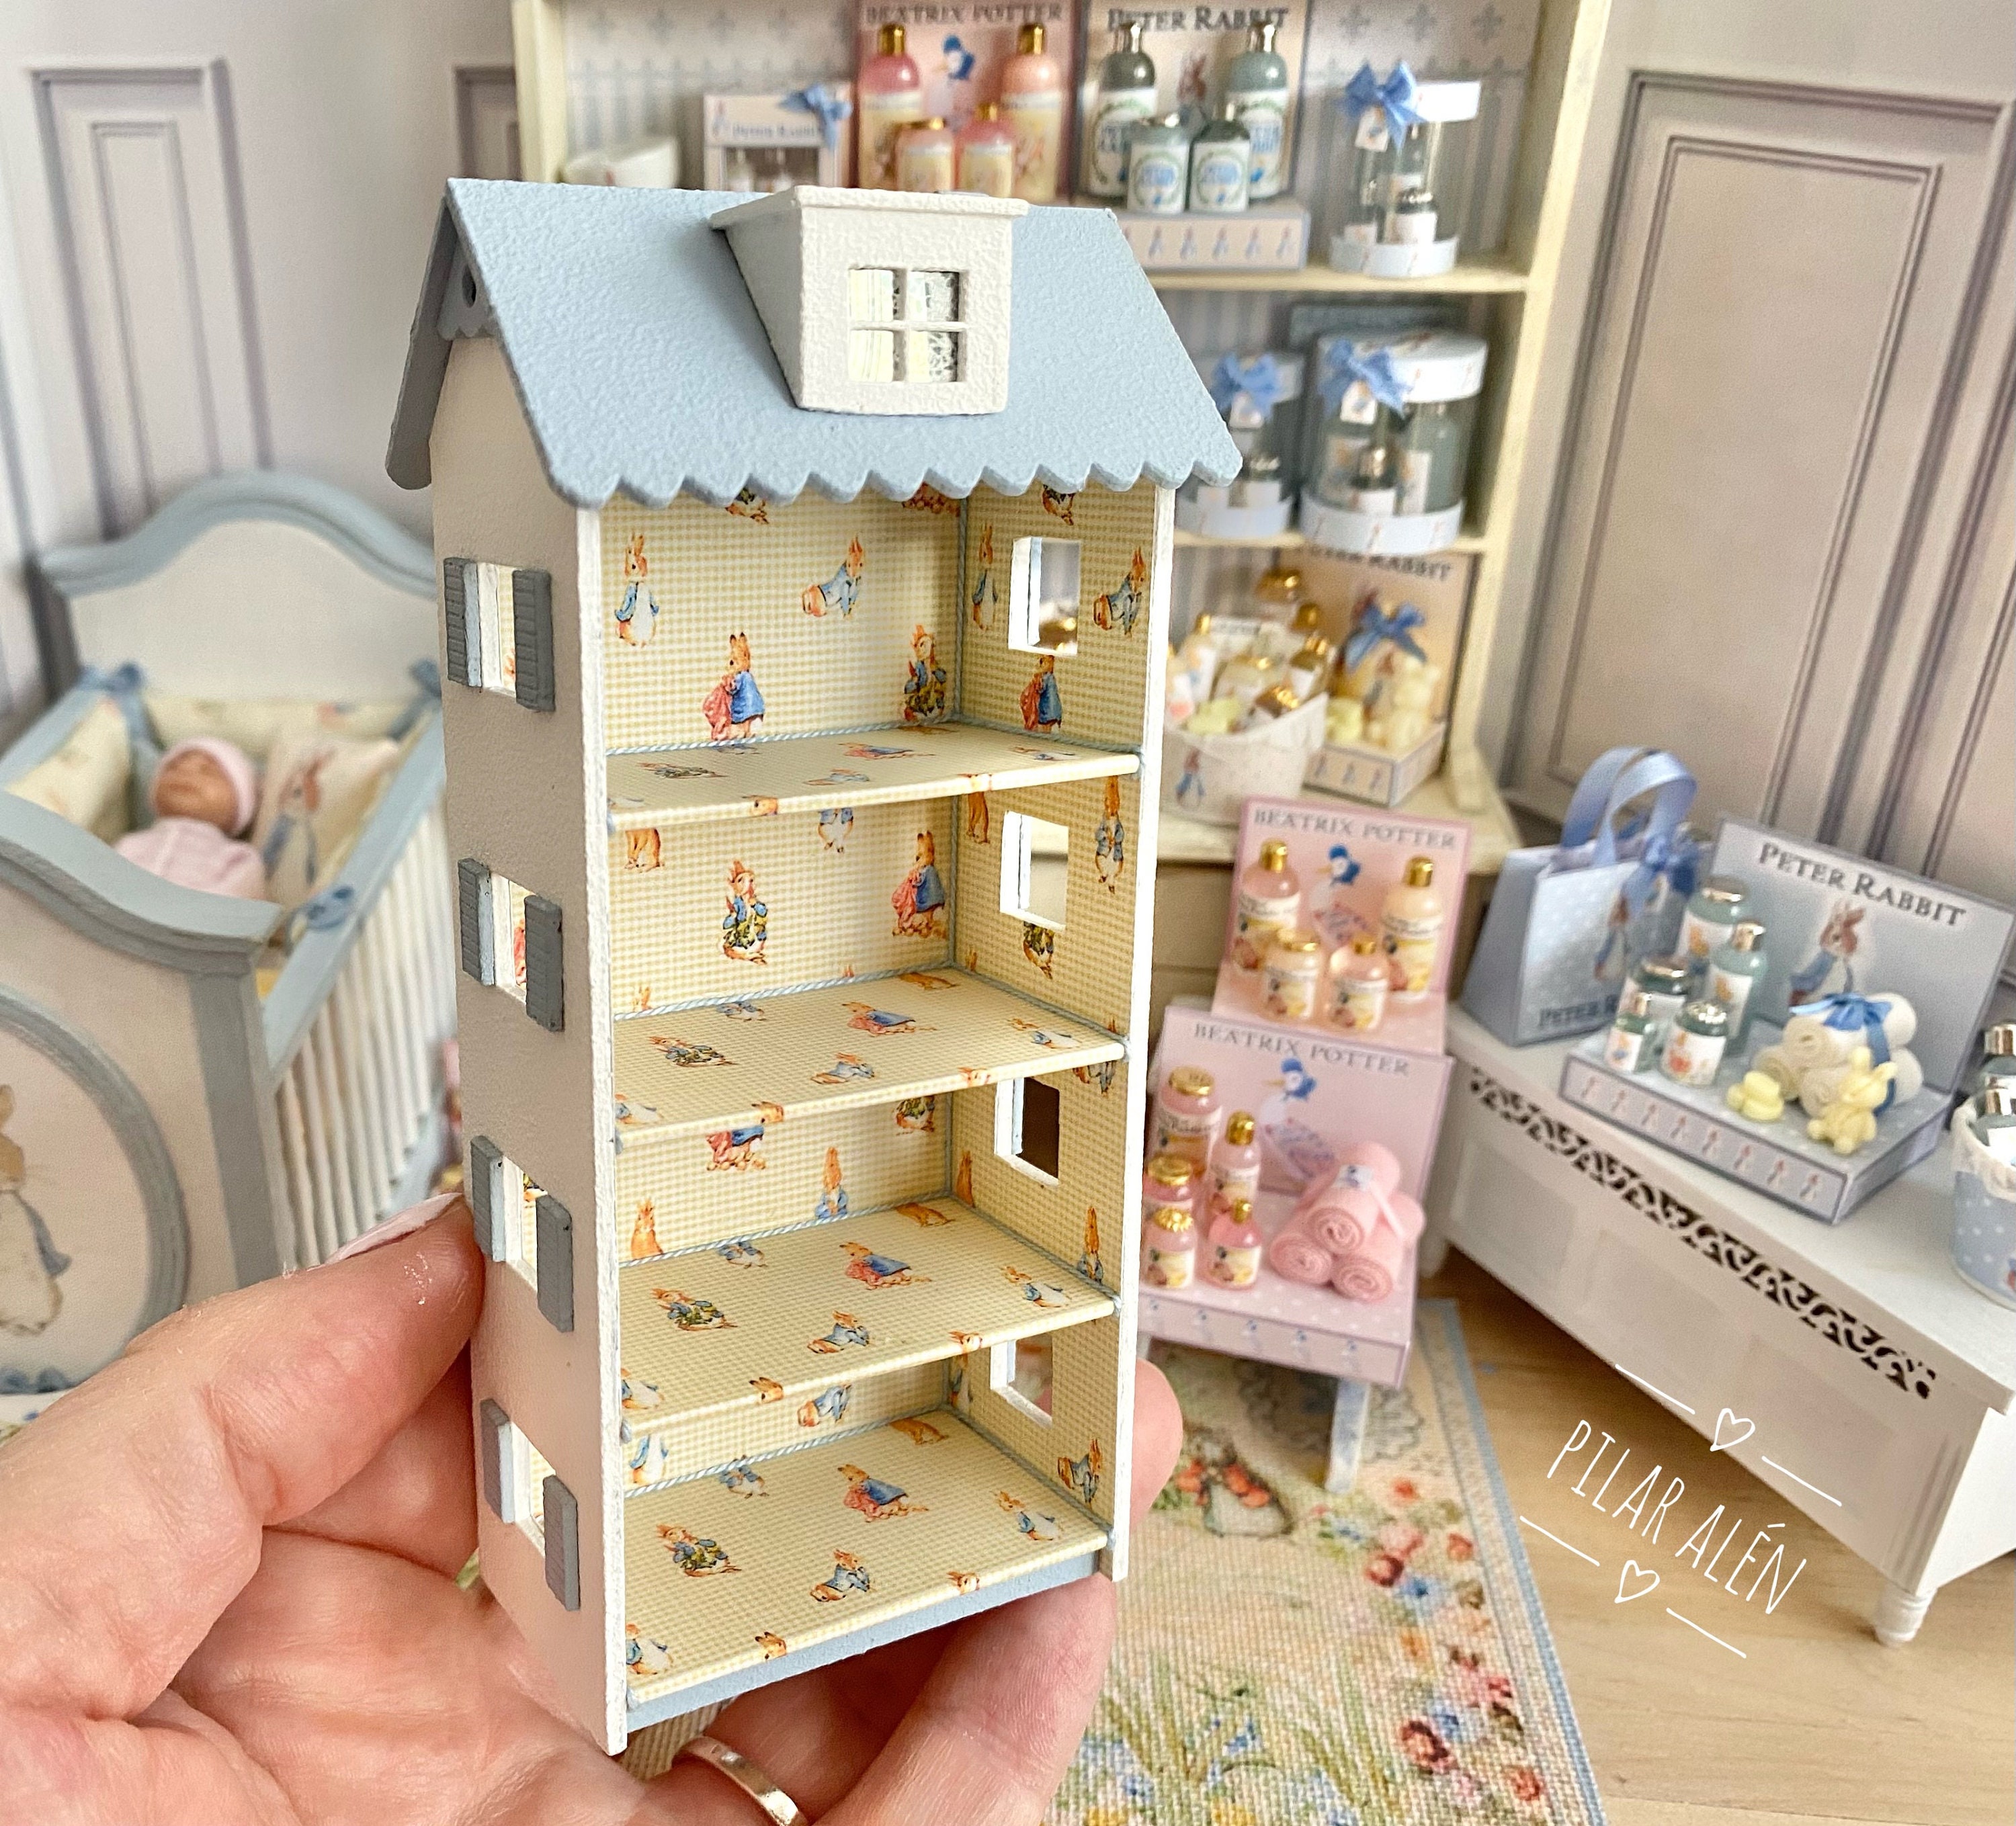 Wood Magazine - Woodworking Project Paper Plan to Build Open House Doll  House